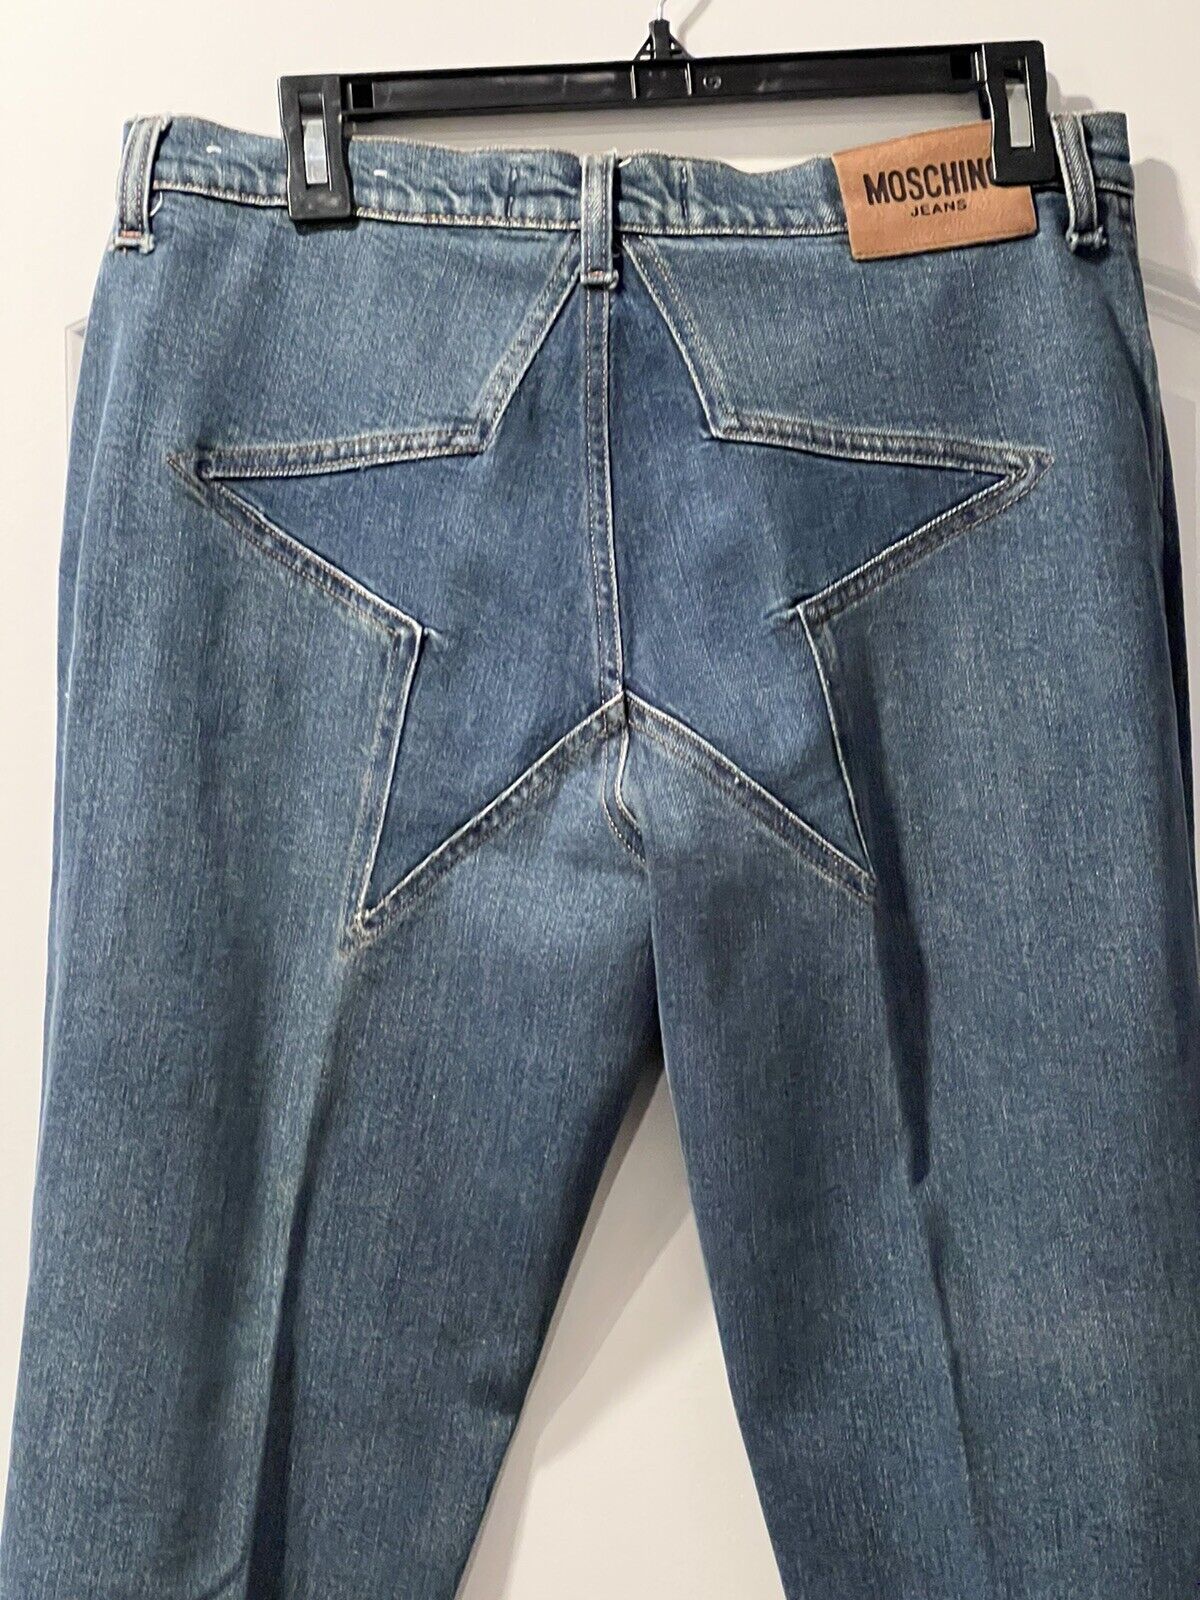 Vintage moschino jeans size 32 - image 2